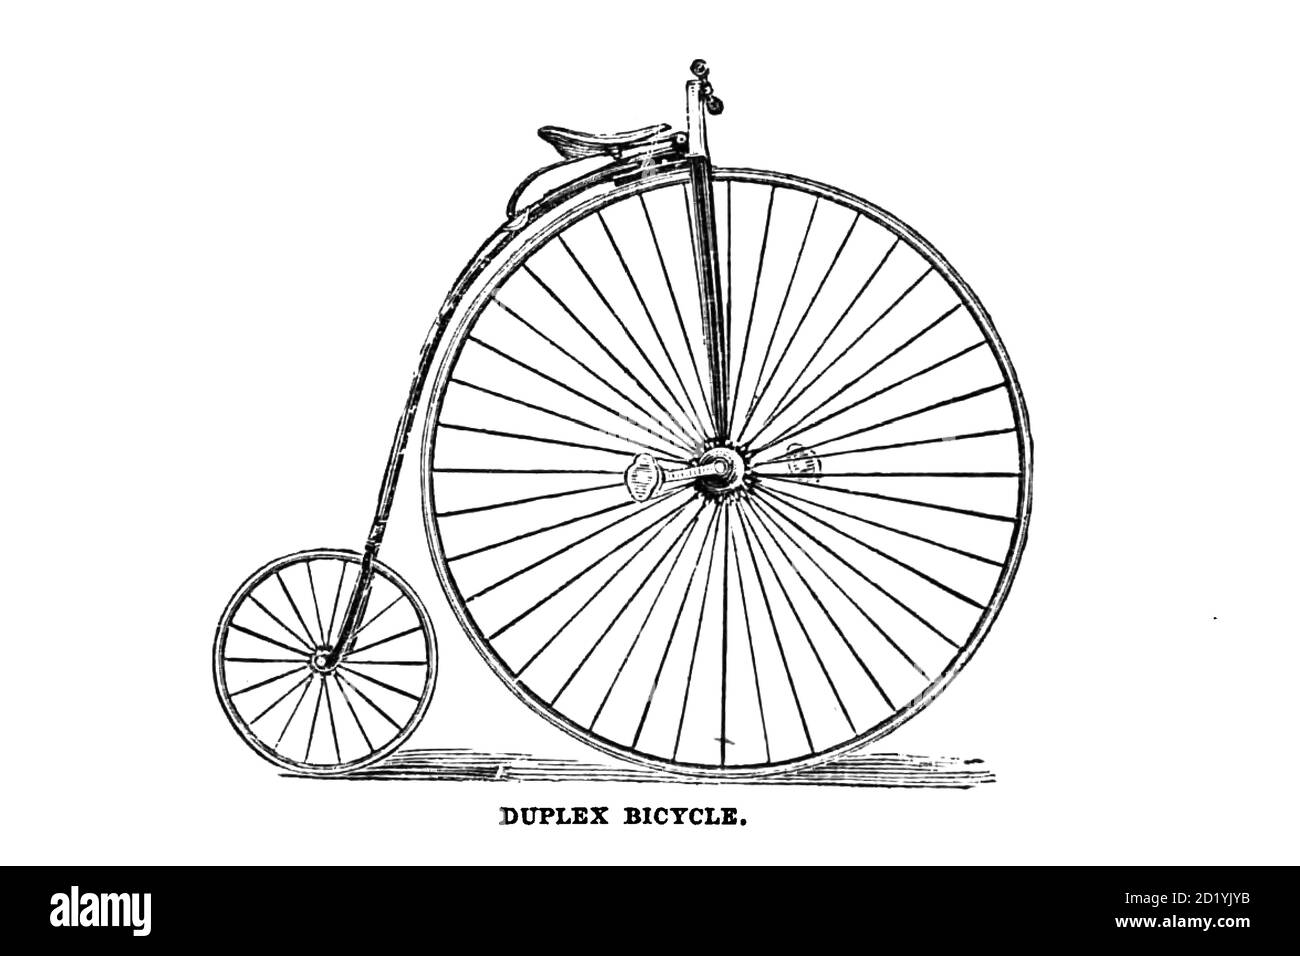 Duplex Bicycle Penny-Farthing The American bicycler: a manual for the observer, the learner, and the expert by Pratt, Charles E. (Charles Eadward), 1845-1898. Publication date 1879. Publisher Boston, Houghton, Osgood and company Stock Photo